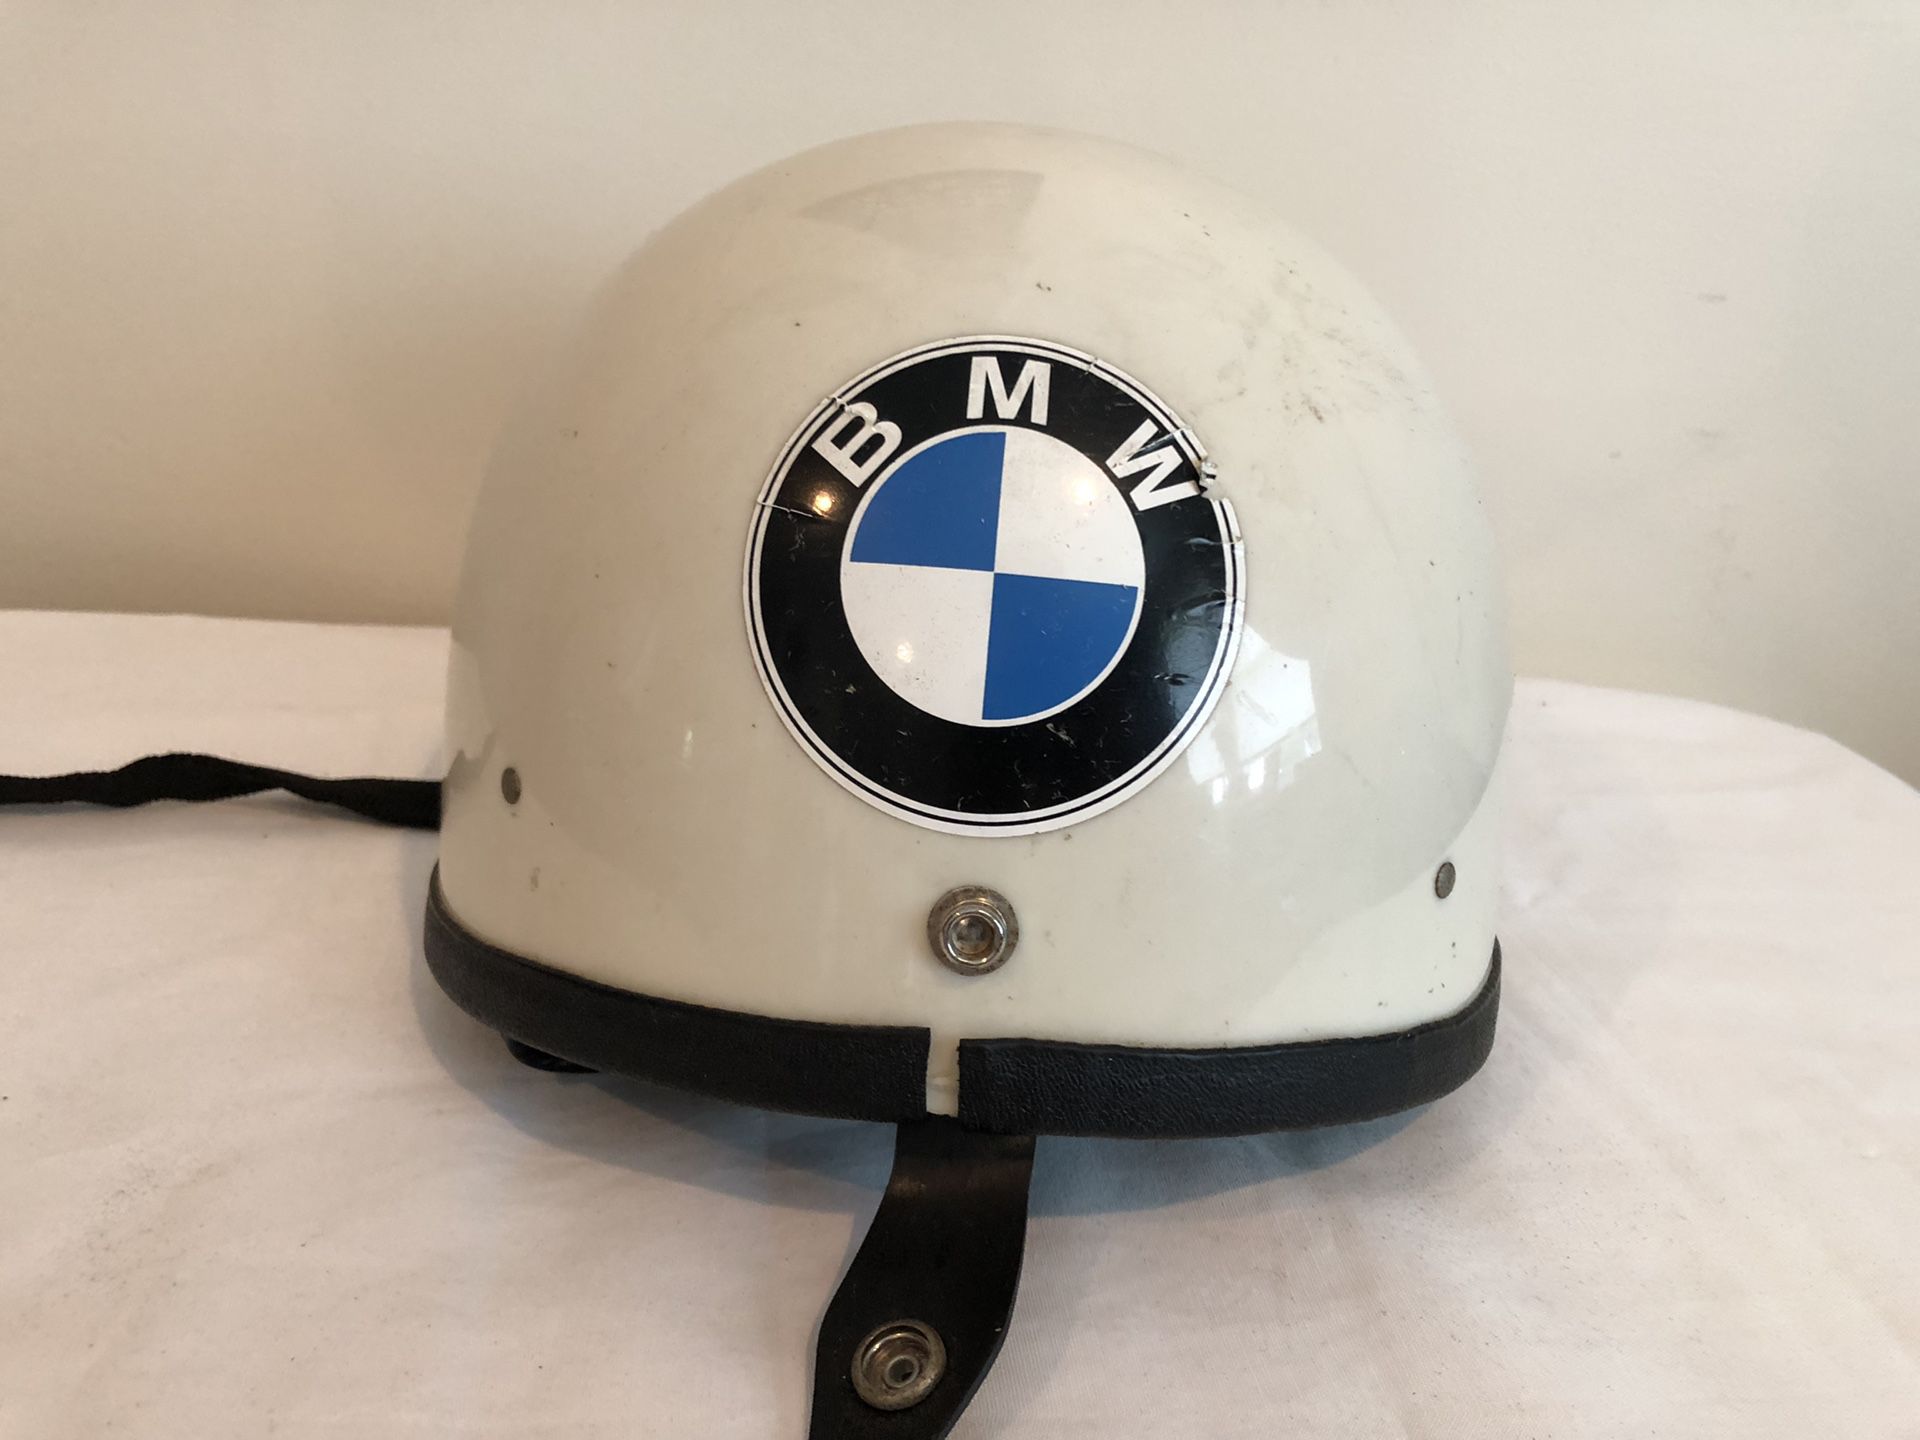 Vintage white bmw motorcycle helmet for Sale in Douglassville, PA - OfferUp